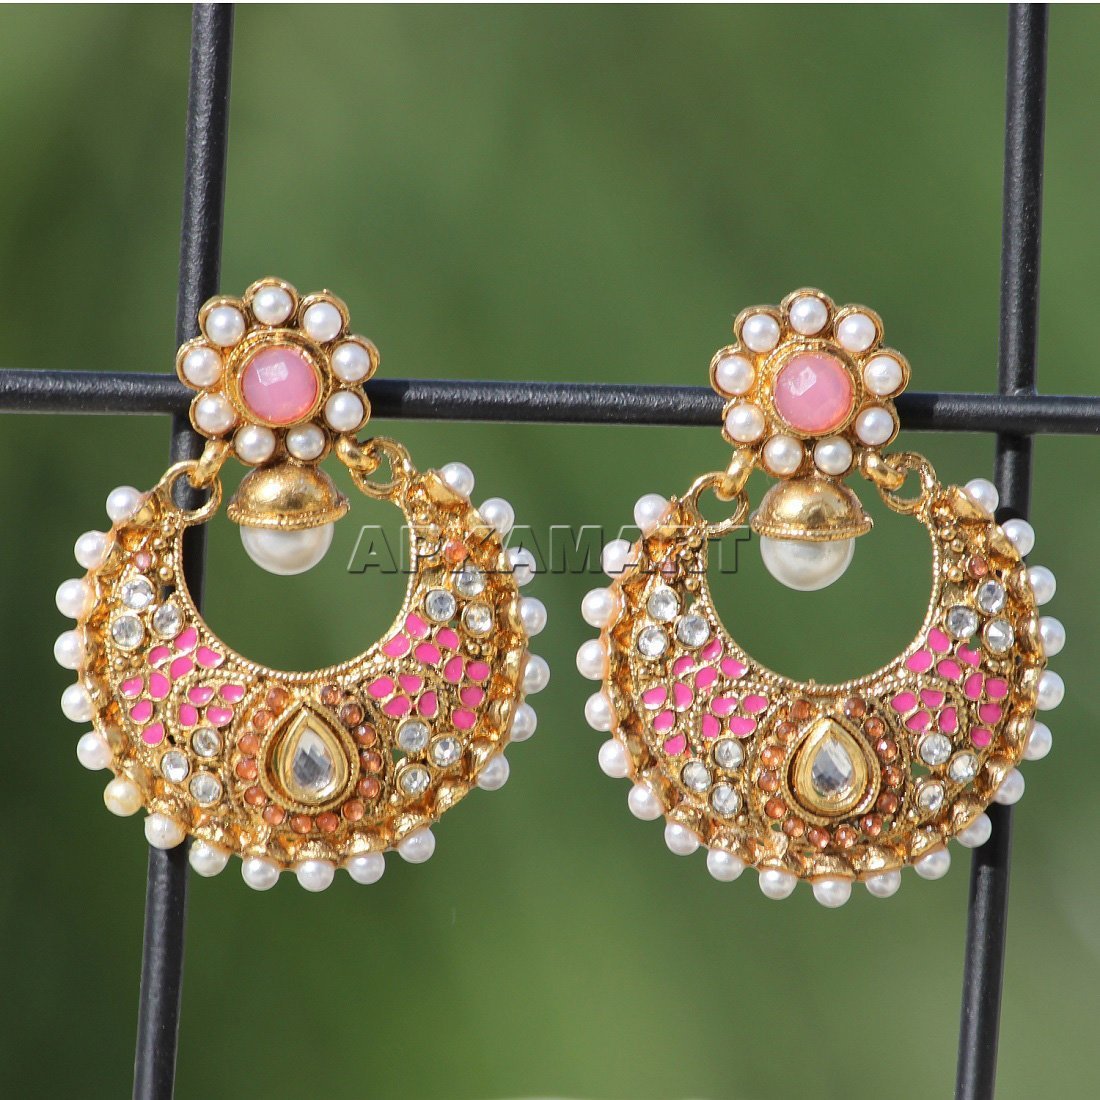 Earrings - Traditional Chand Bali with Pink Beads - Jewellery For Women & Girls - ApkaMart